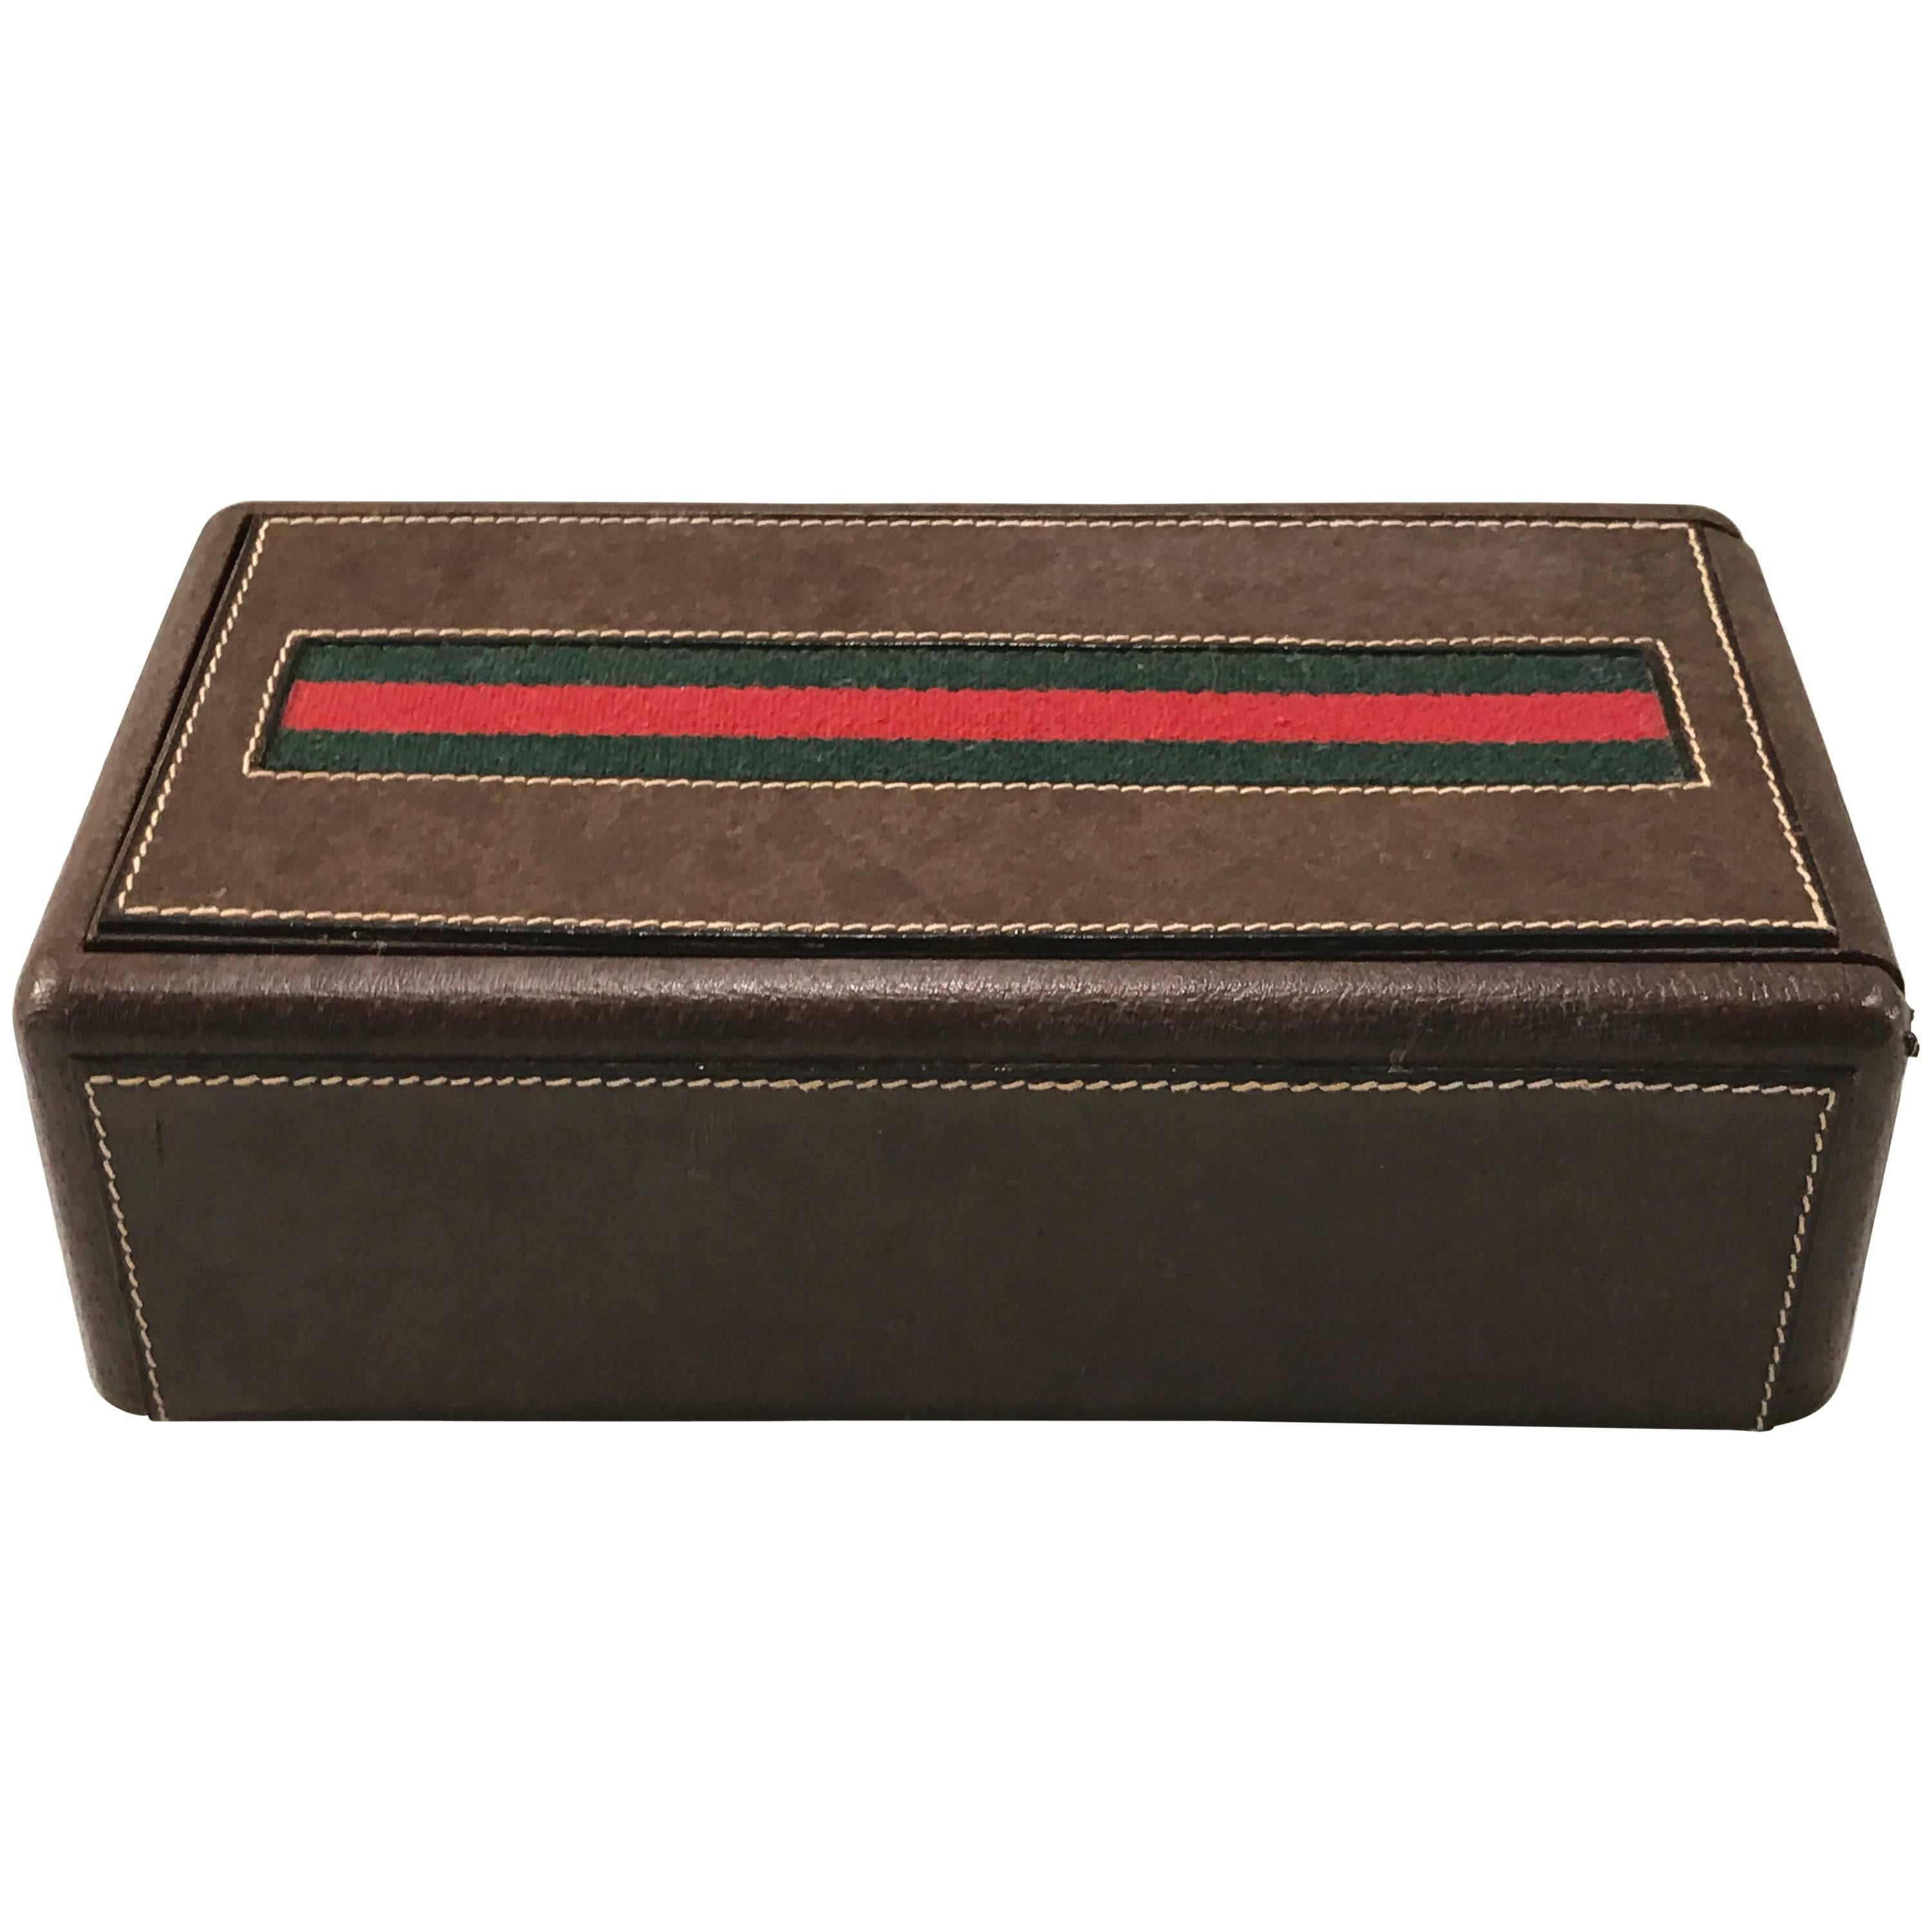 Gucci Leather Mens Jewelry or Watch Box with Divided Interior